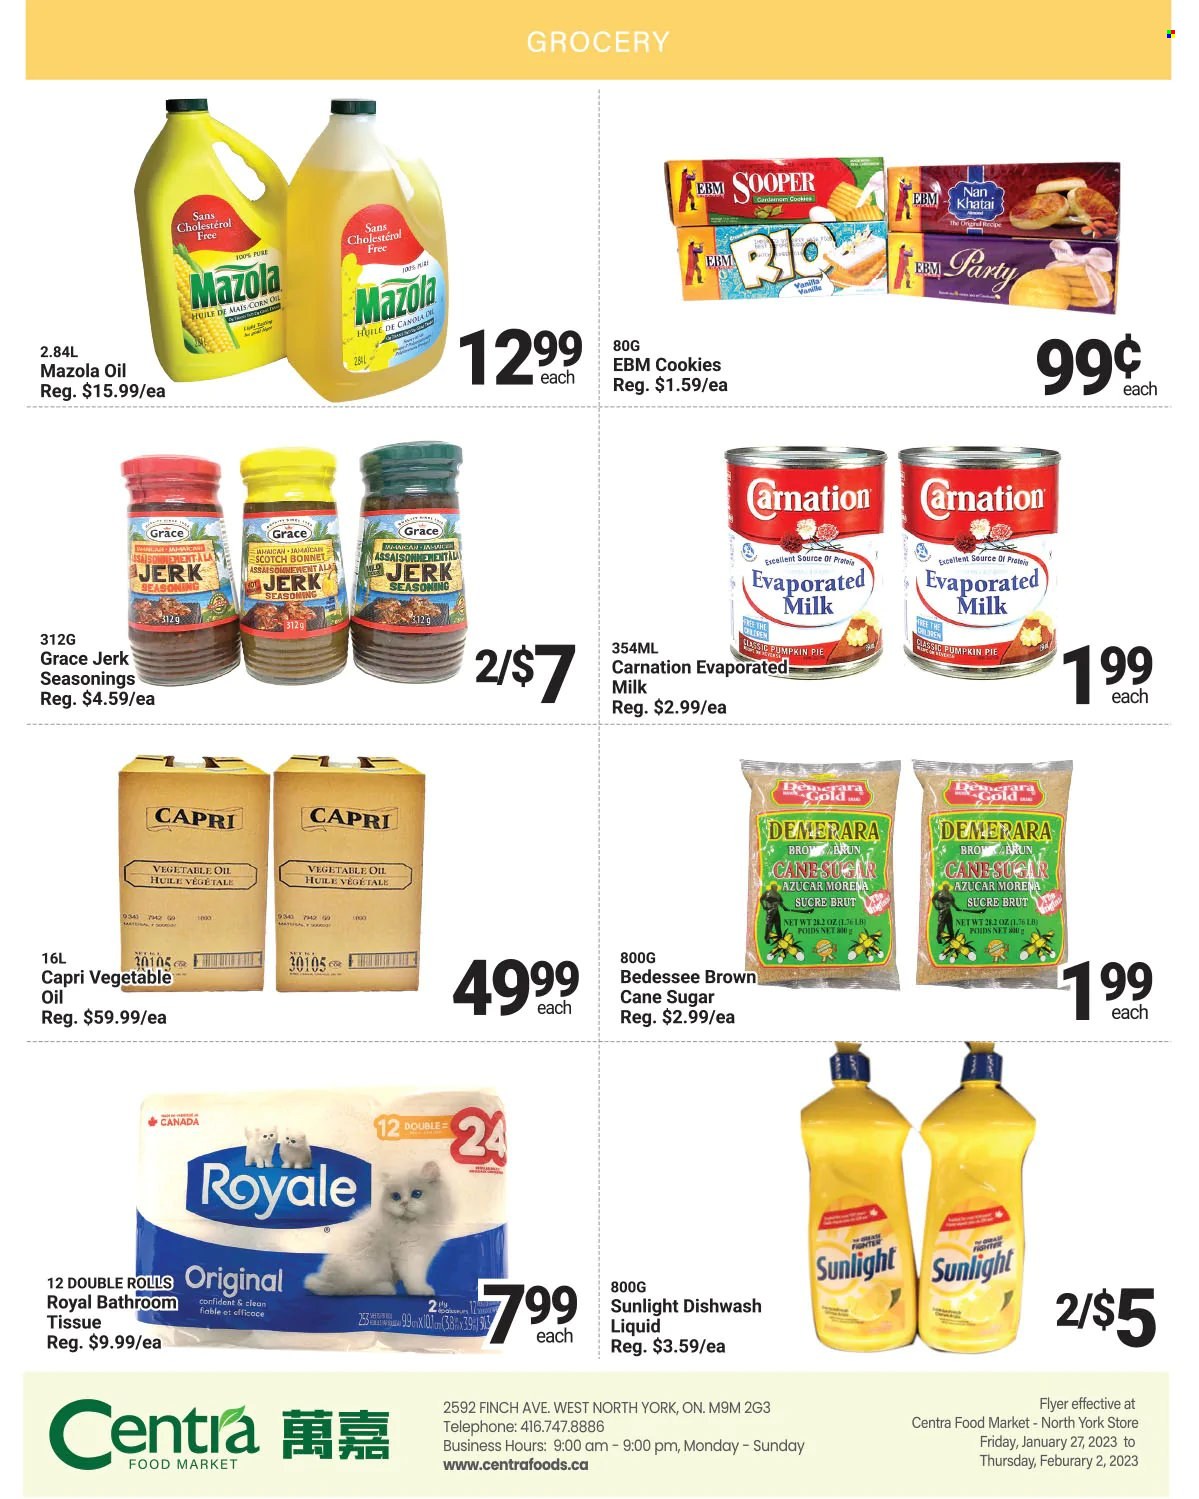 thumbnail - Centra Food Market Flyer - January 27, 2023 - February 02, 2023 - Sales products - evaporated milk, cookies, cane sugar, demerara sugar, sugar, spice, vegetable oil, oil, bath tissue, Sunlight, Brut. Page 4.